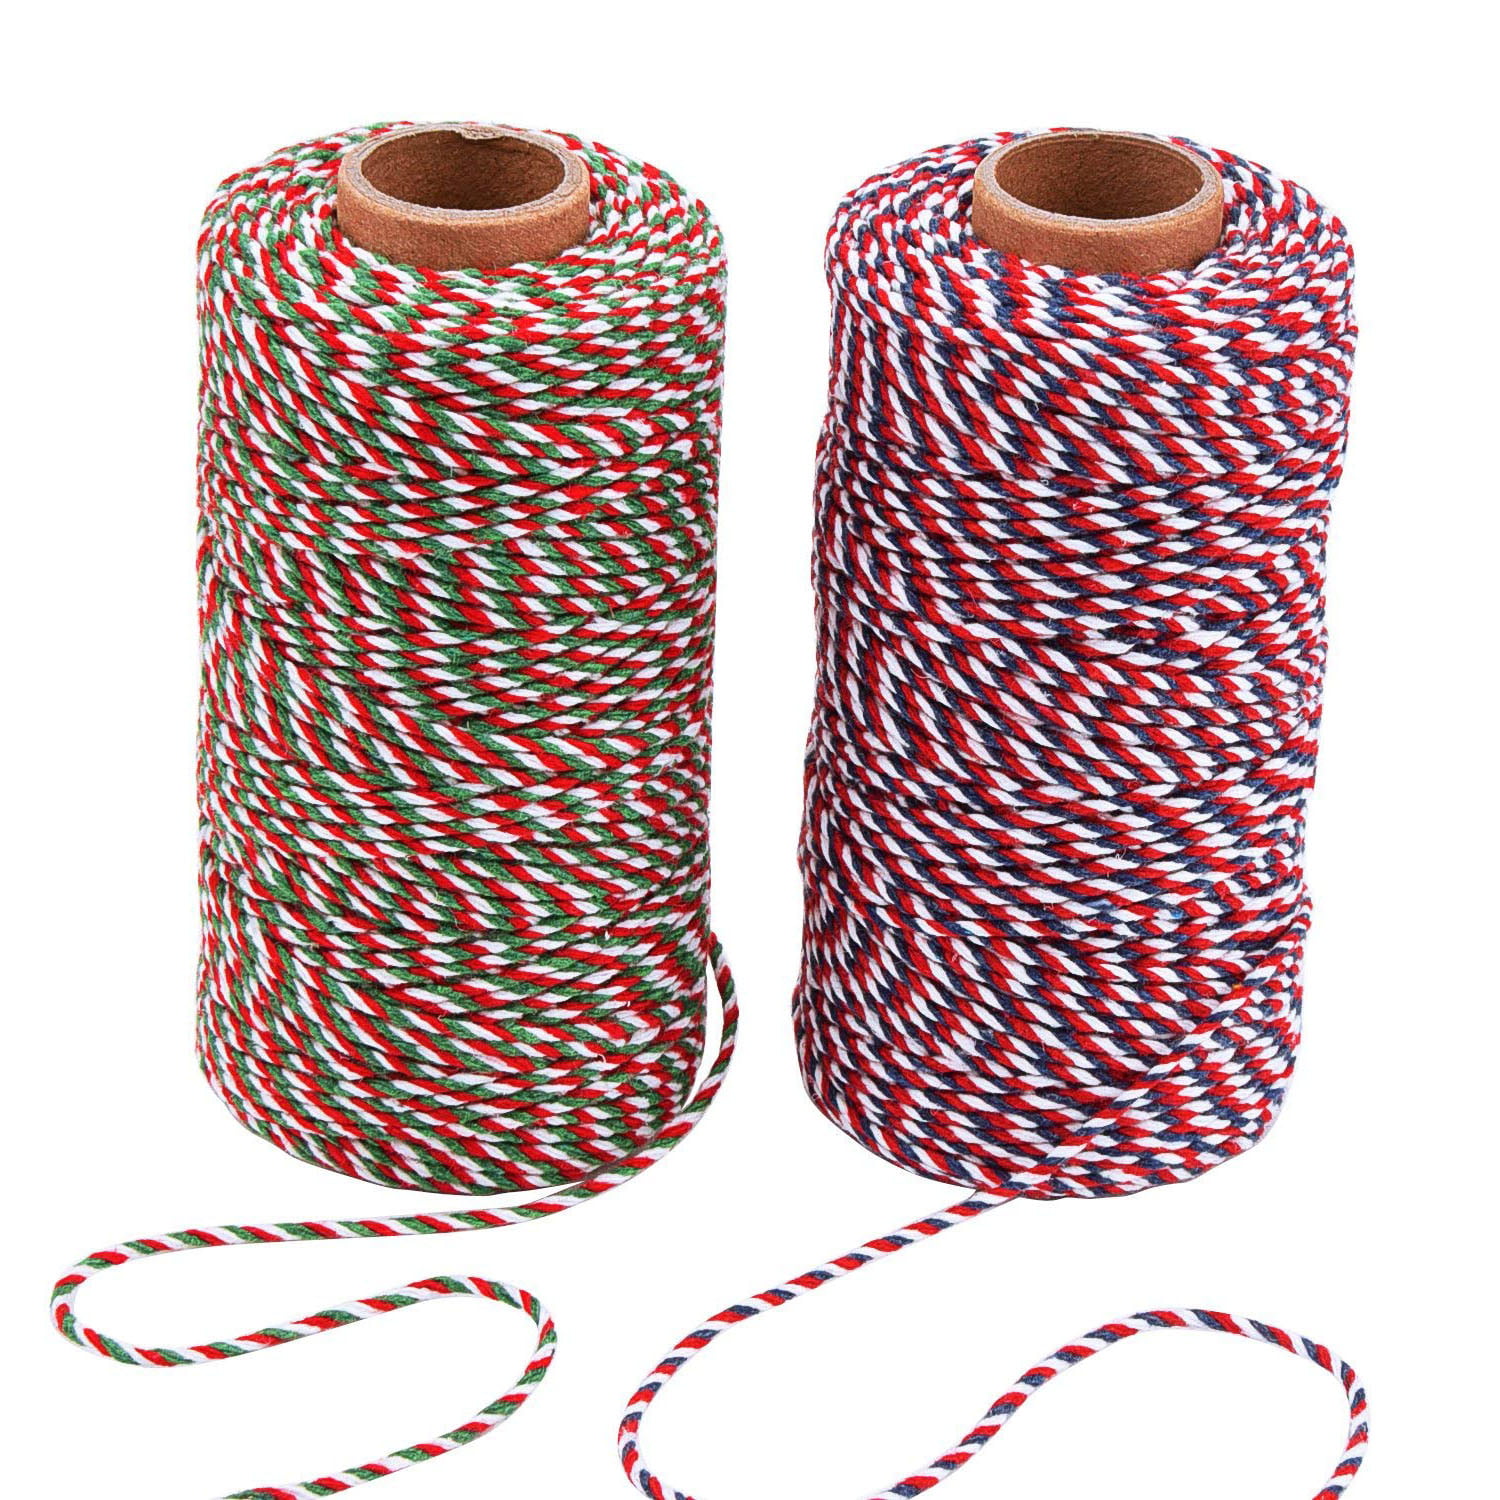 Tenn Well 328 Feet x 2 Rolls Cotton Twine 2mm Color Macrame String for Gift Wrapping DIY Arts Crafts Christmas Decoration